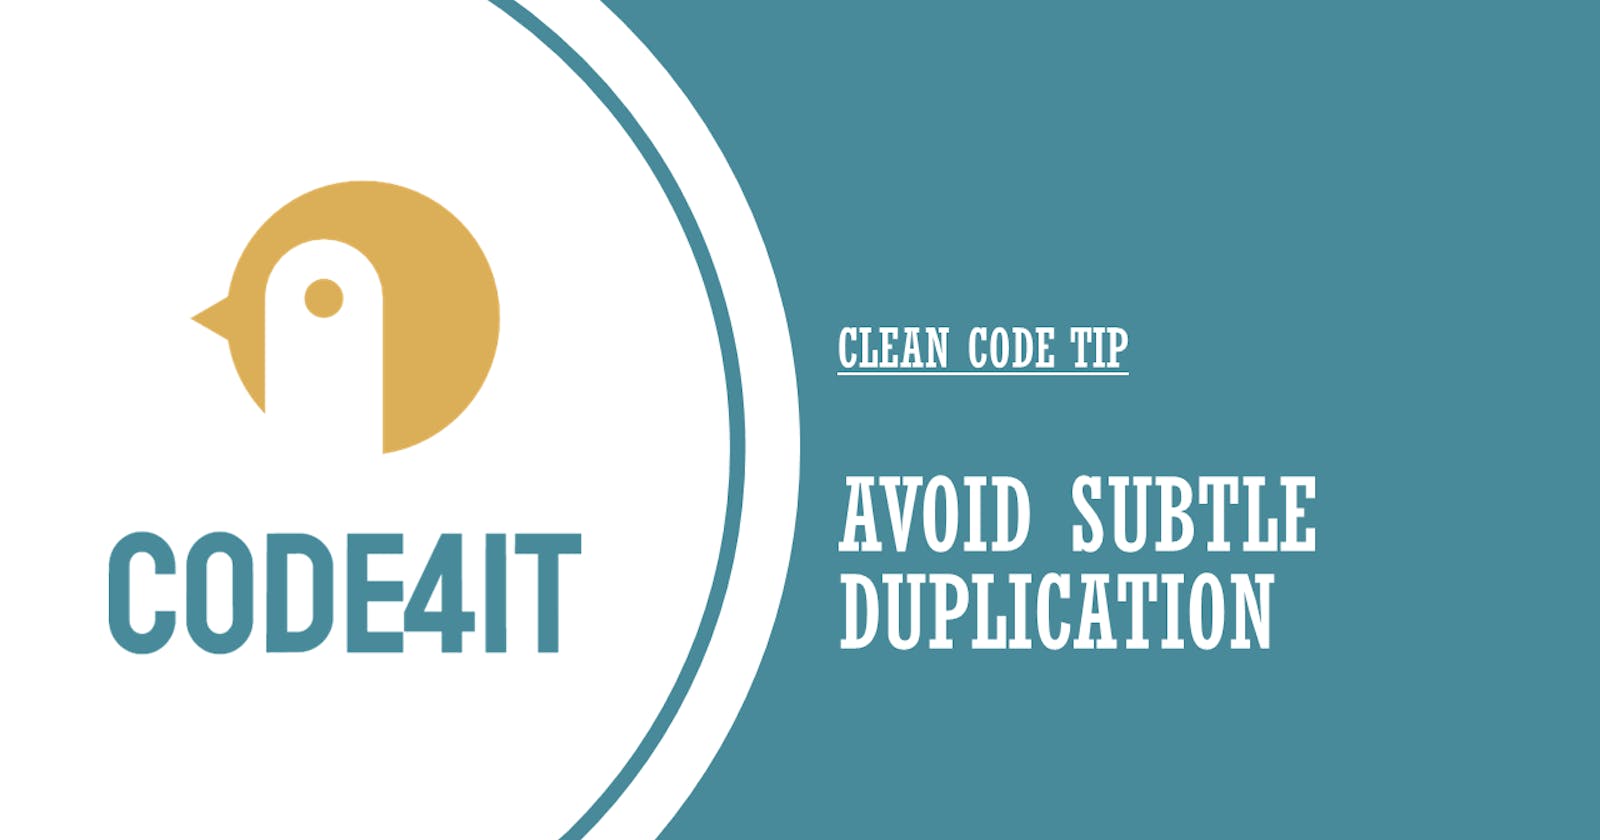 Clean Code Tip: Avoid subtle duplication of code and logic